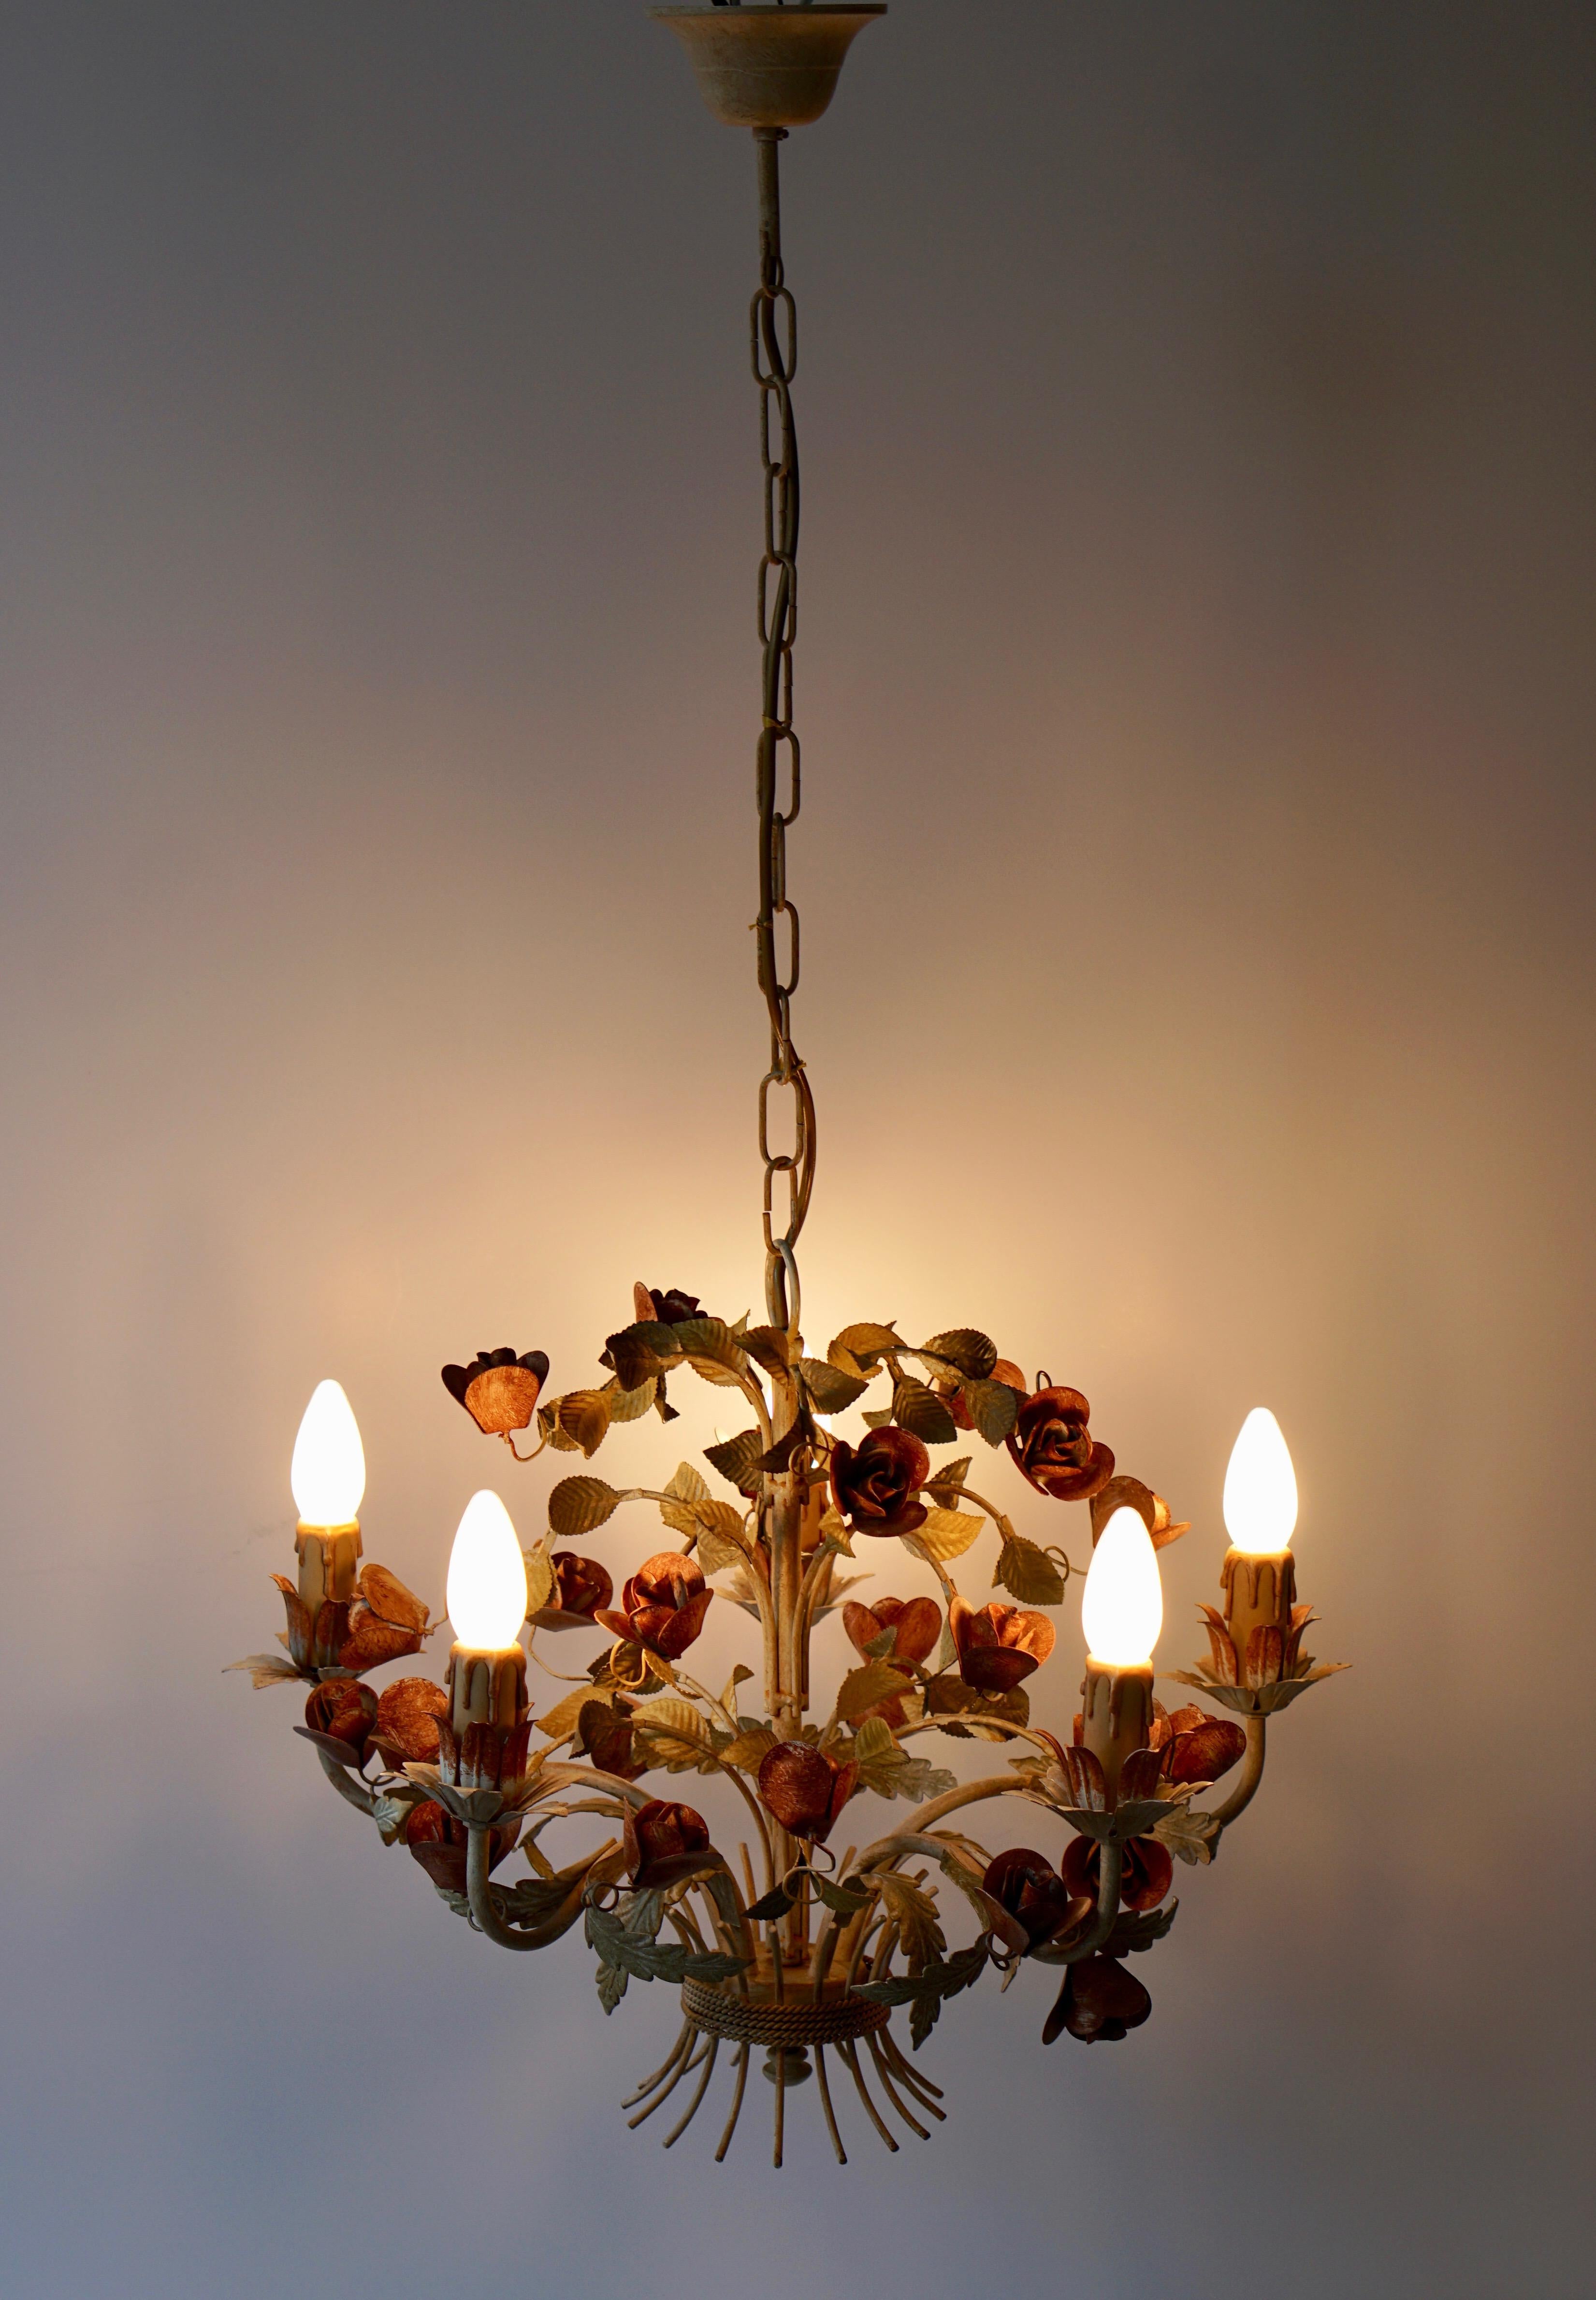 Mid-20th Century Italian Painted Iron and Tole Chandelier with Flowers 14